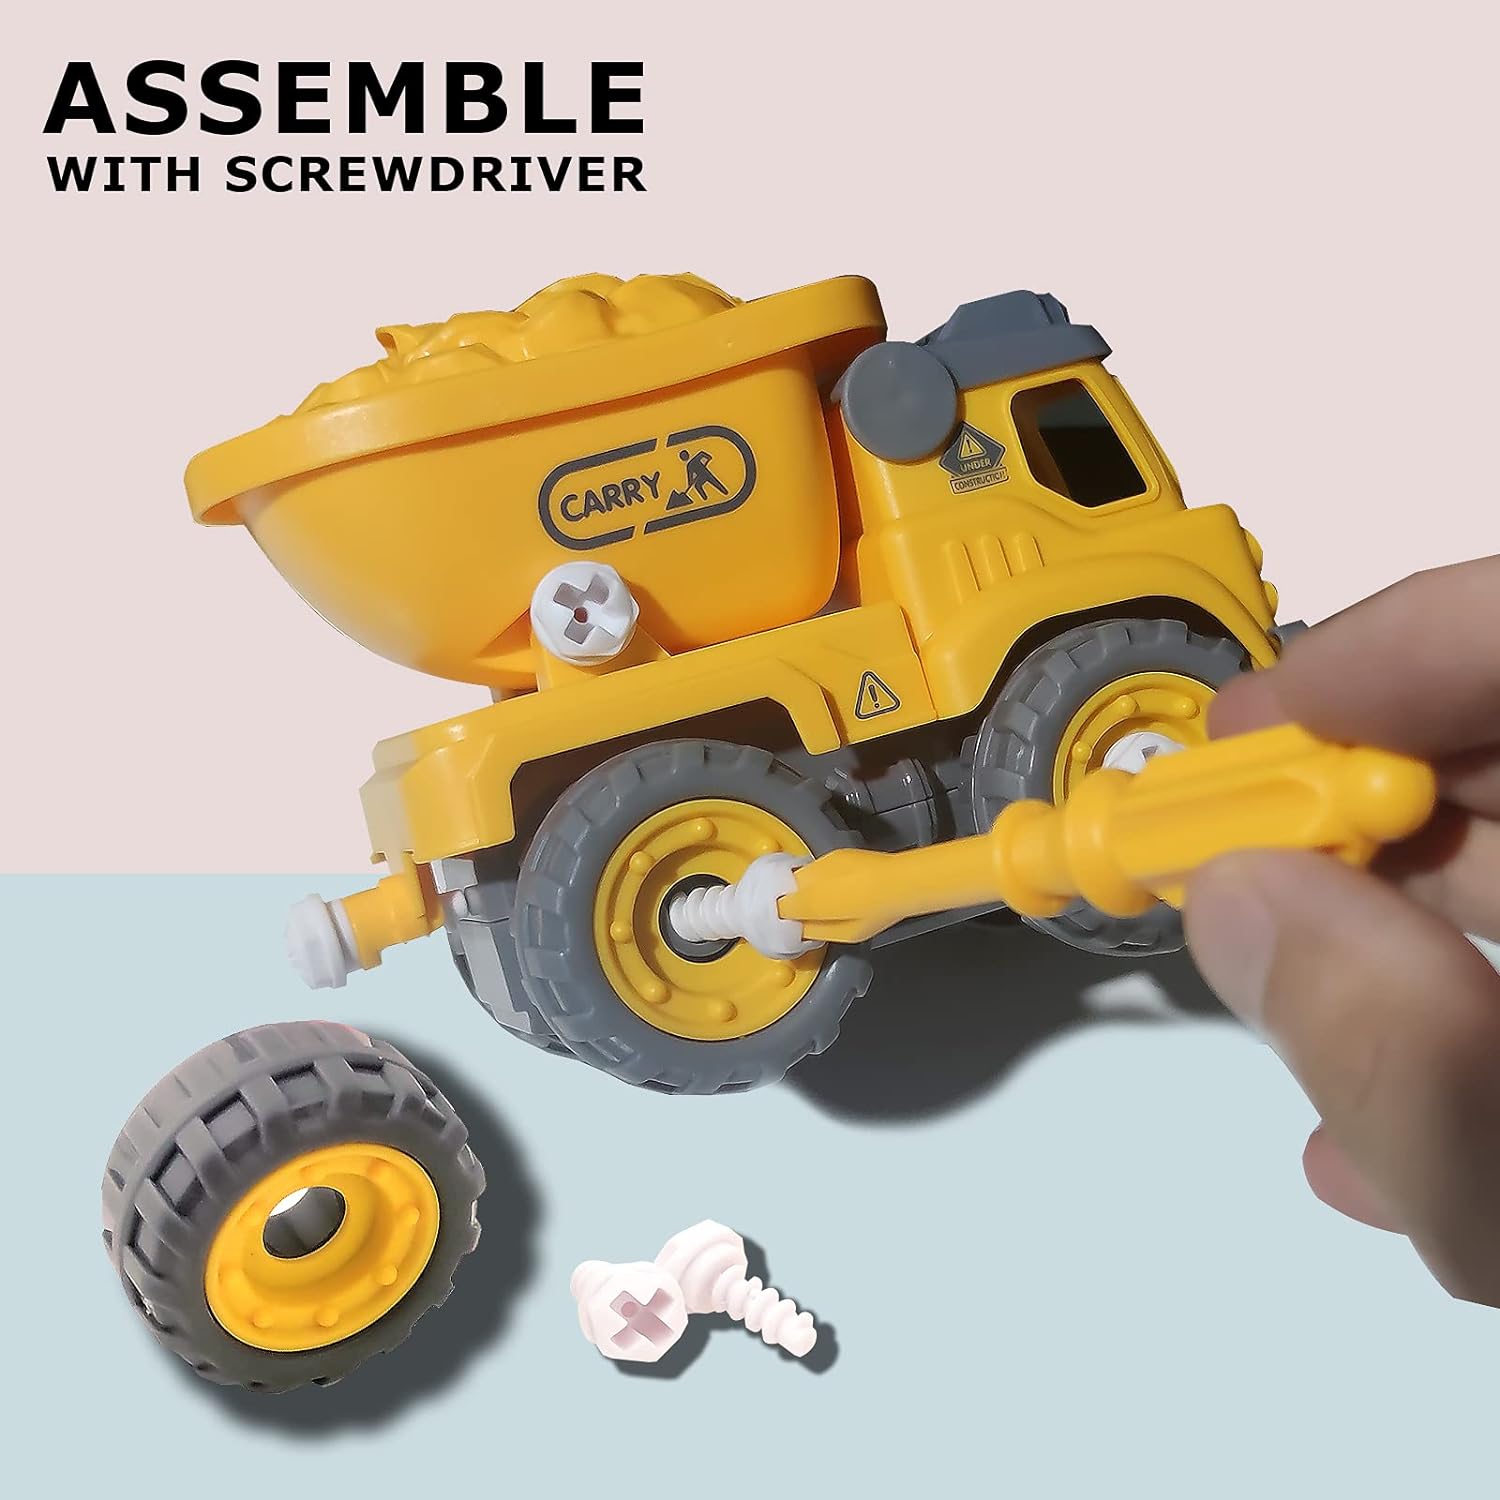 LEXiBOOK Robotruck®, 5 in 1 Build-Your-own Robot kit, transformable  Construction Vehicles 5 in 1, DIY, Construction, Building, Truck,  Educational